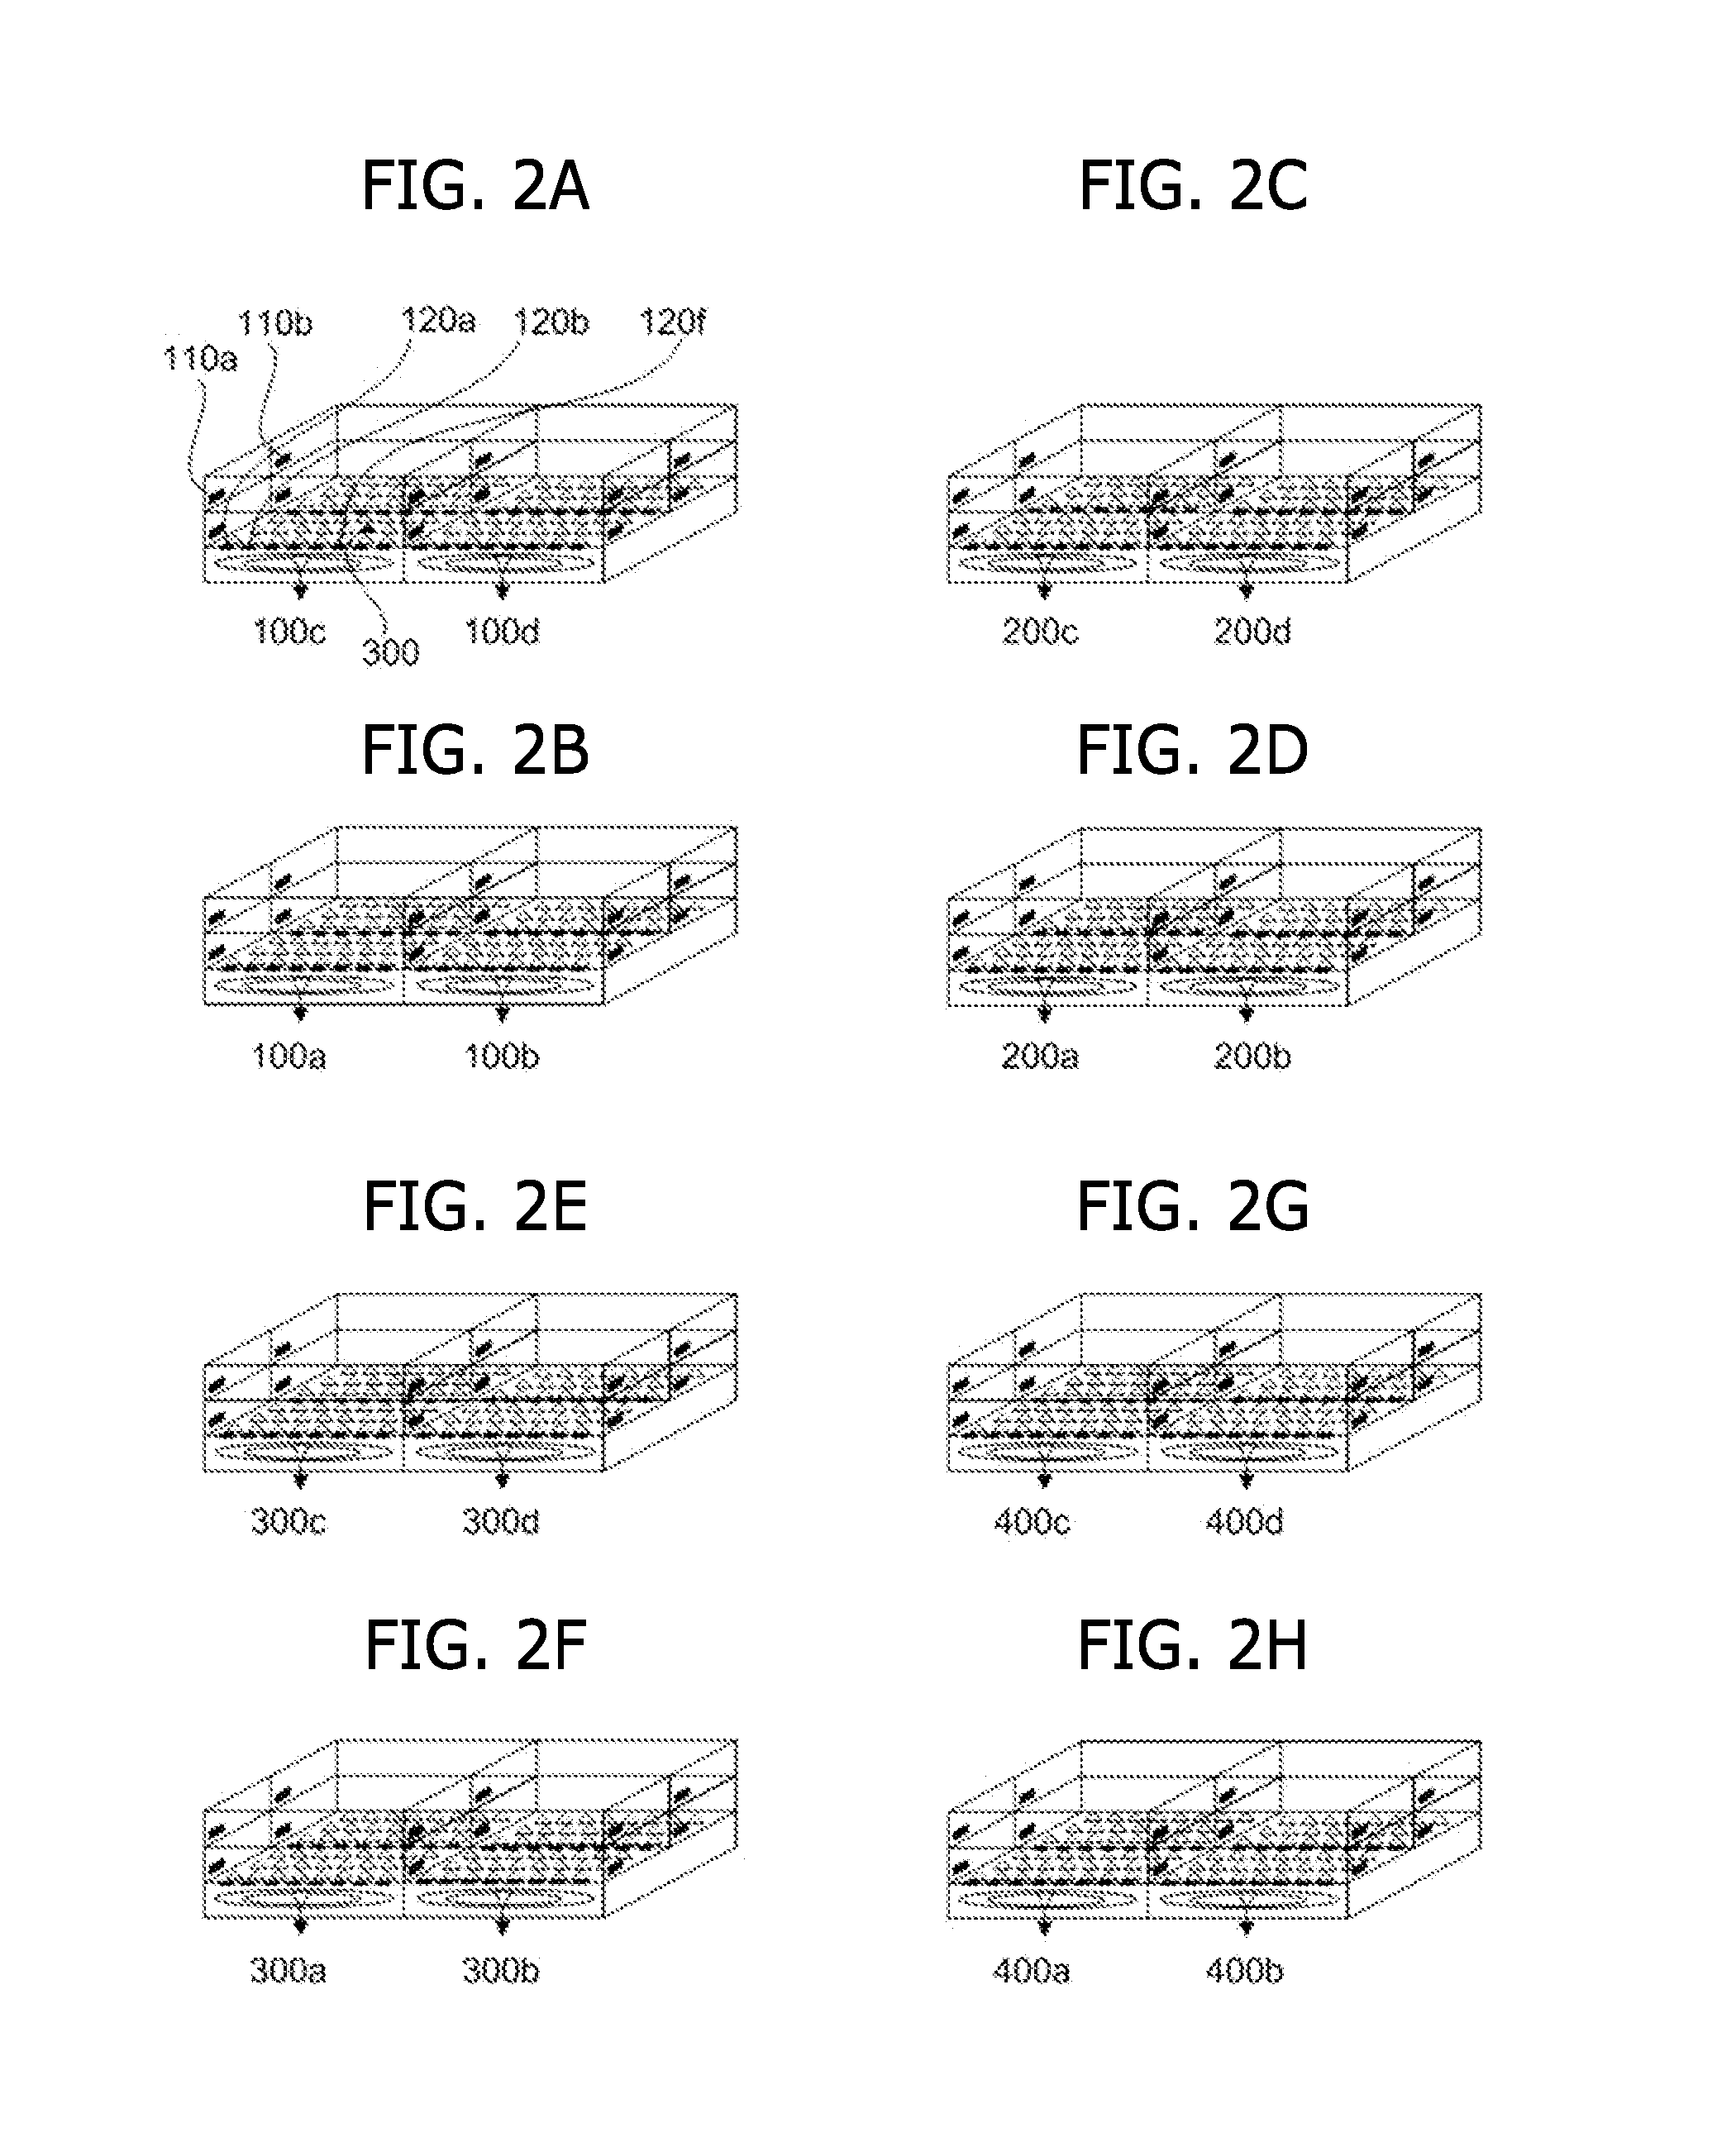 Apparatus and method for recognizing location of object in location recognition system